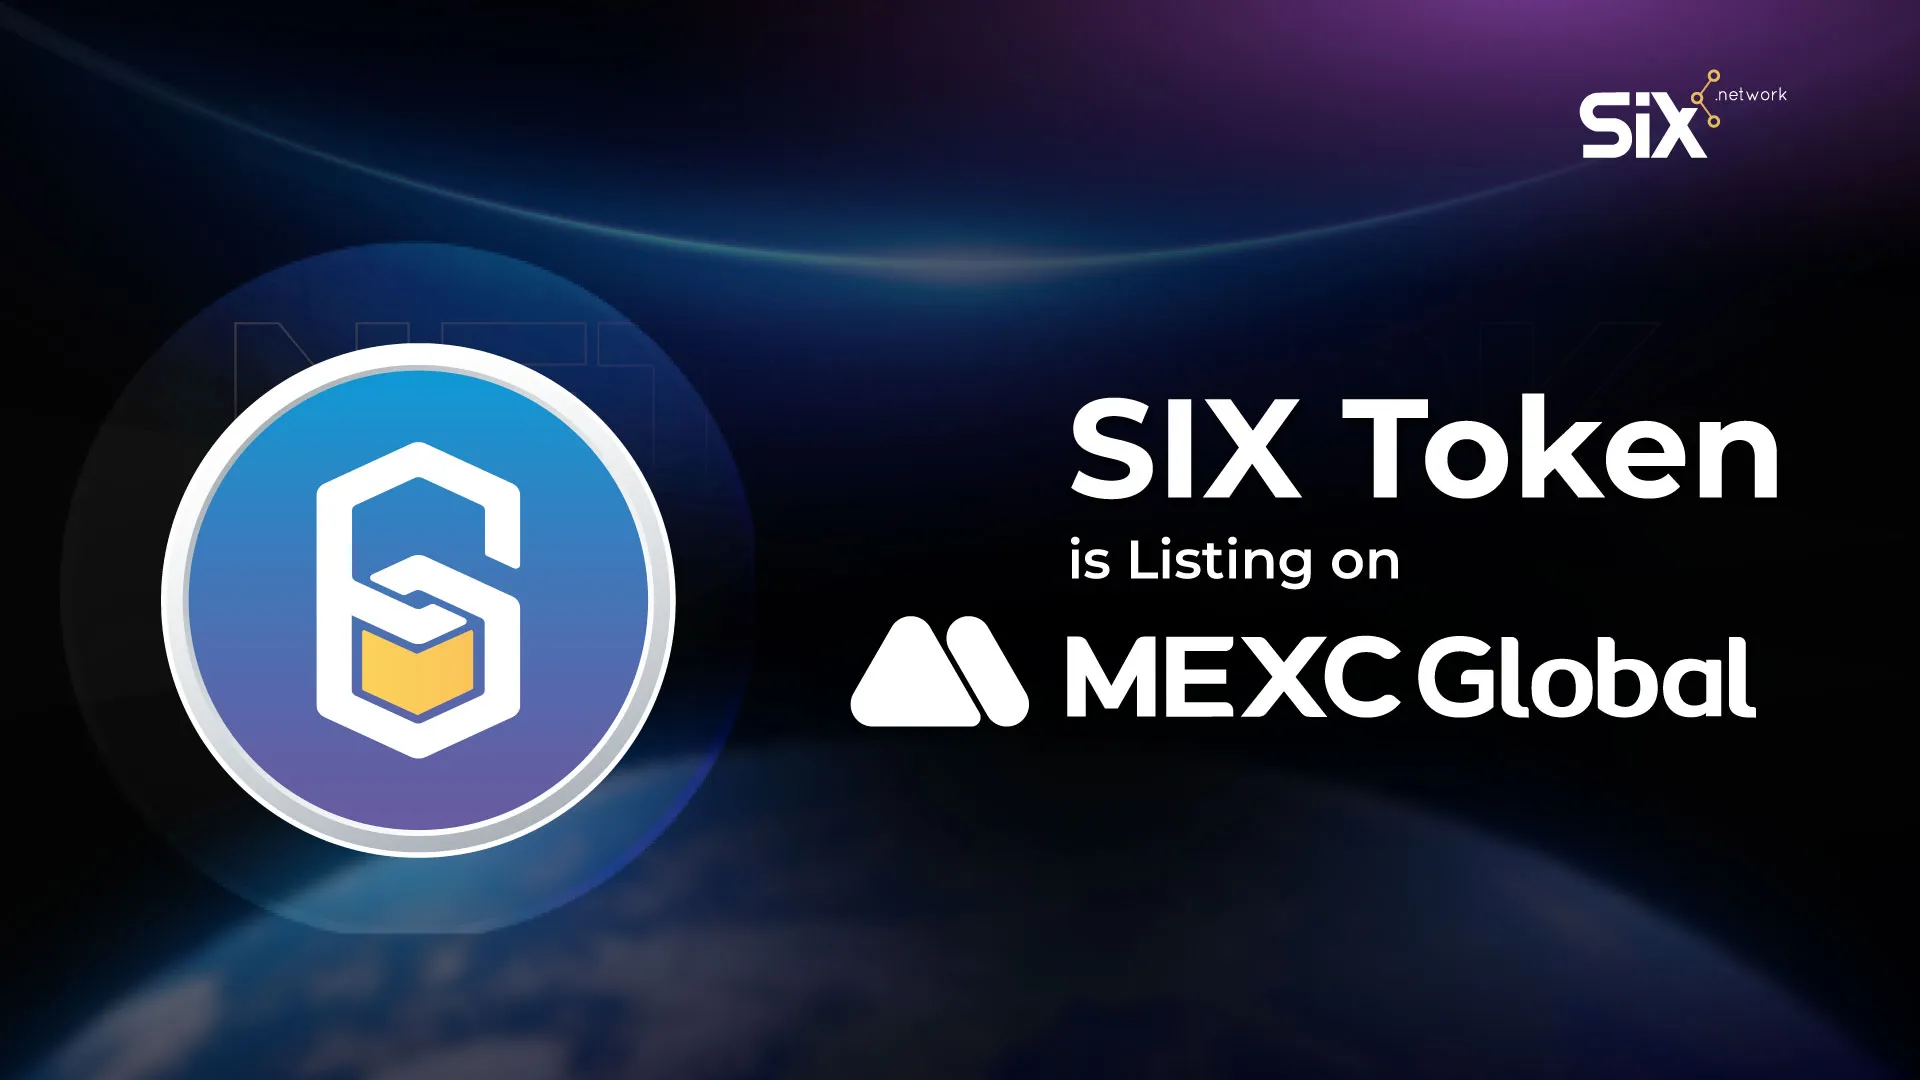 SIX Token is Listing on MEXC Global, a Top 20 Global Exchange